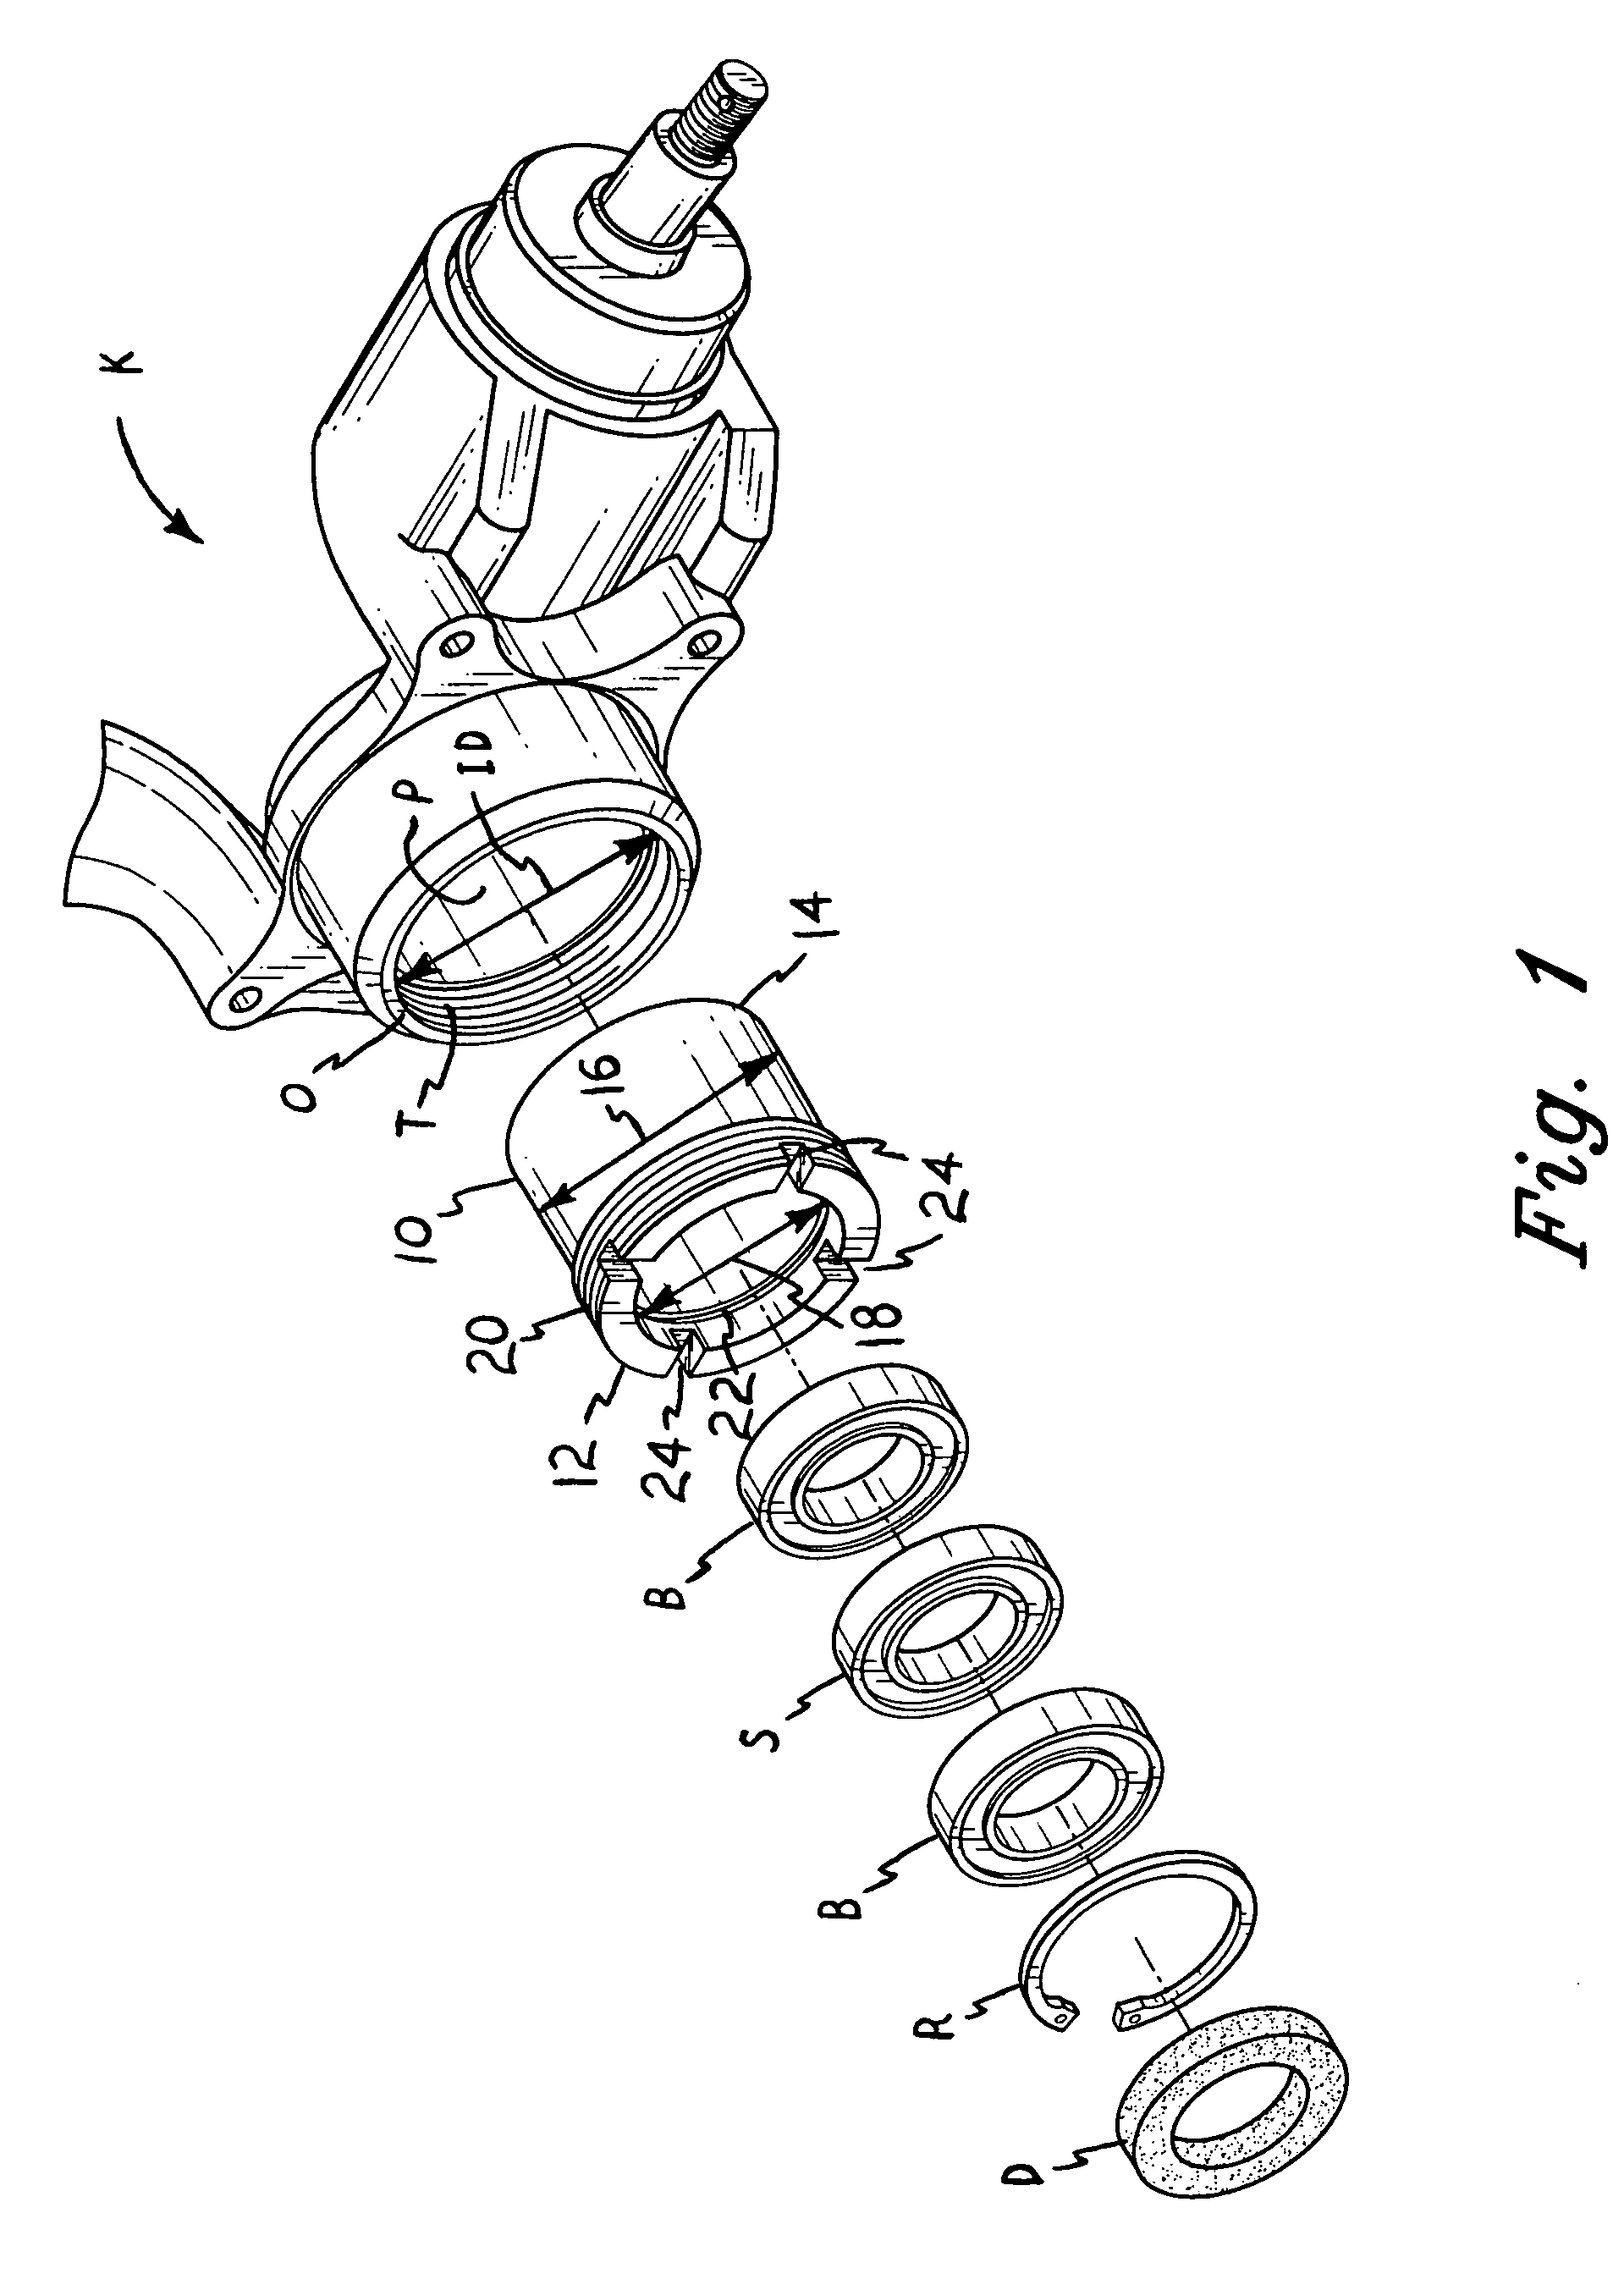 Bearing insert and service tools